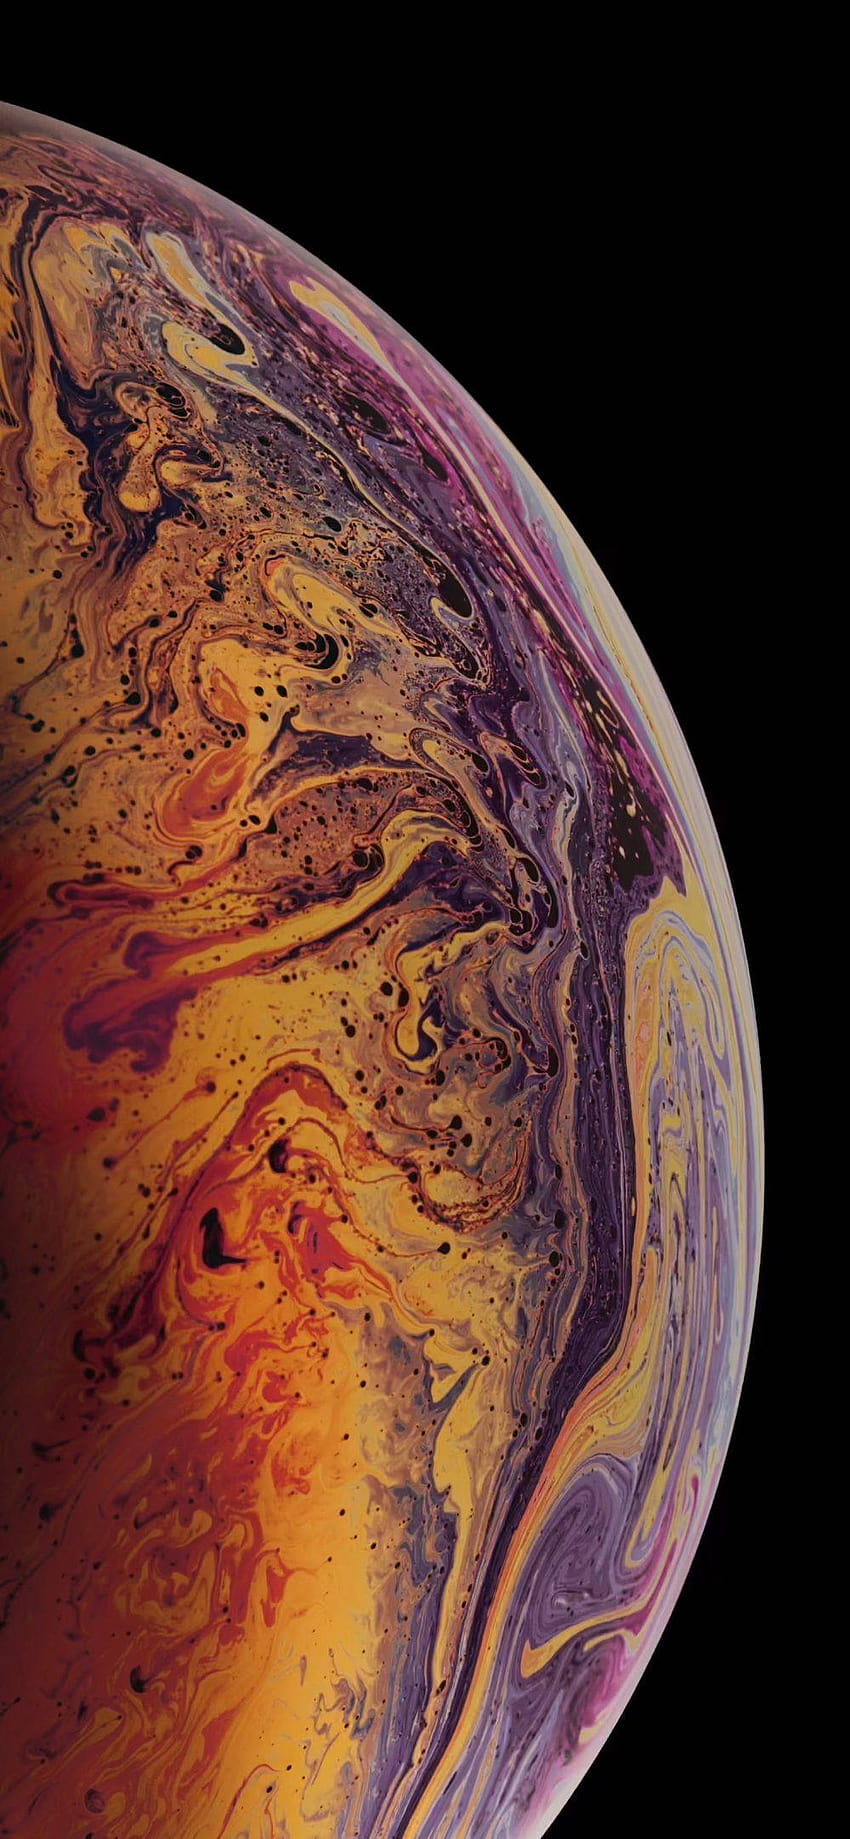 The 3 Official iPhone XS and XS Max Here, original HD phone wallpaper